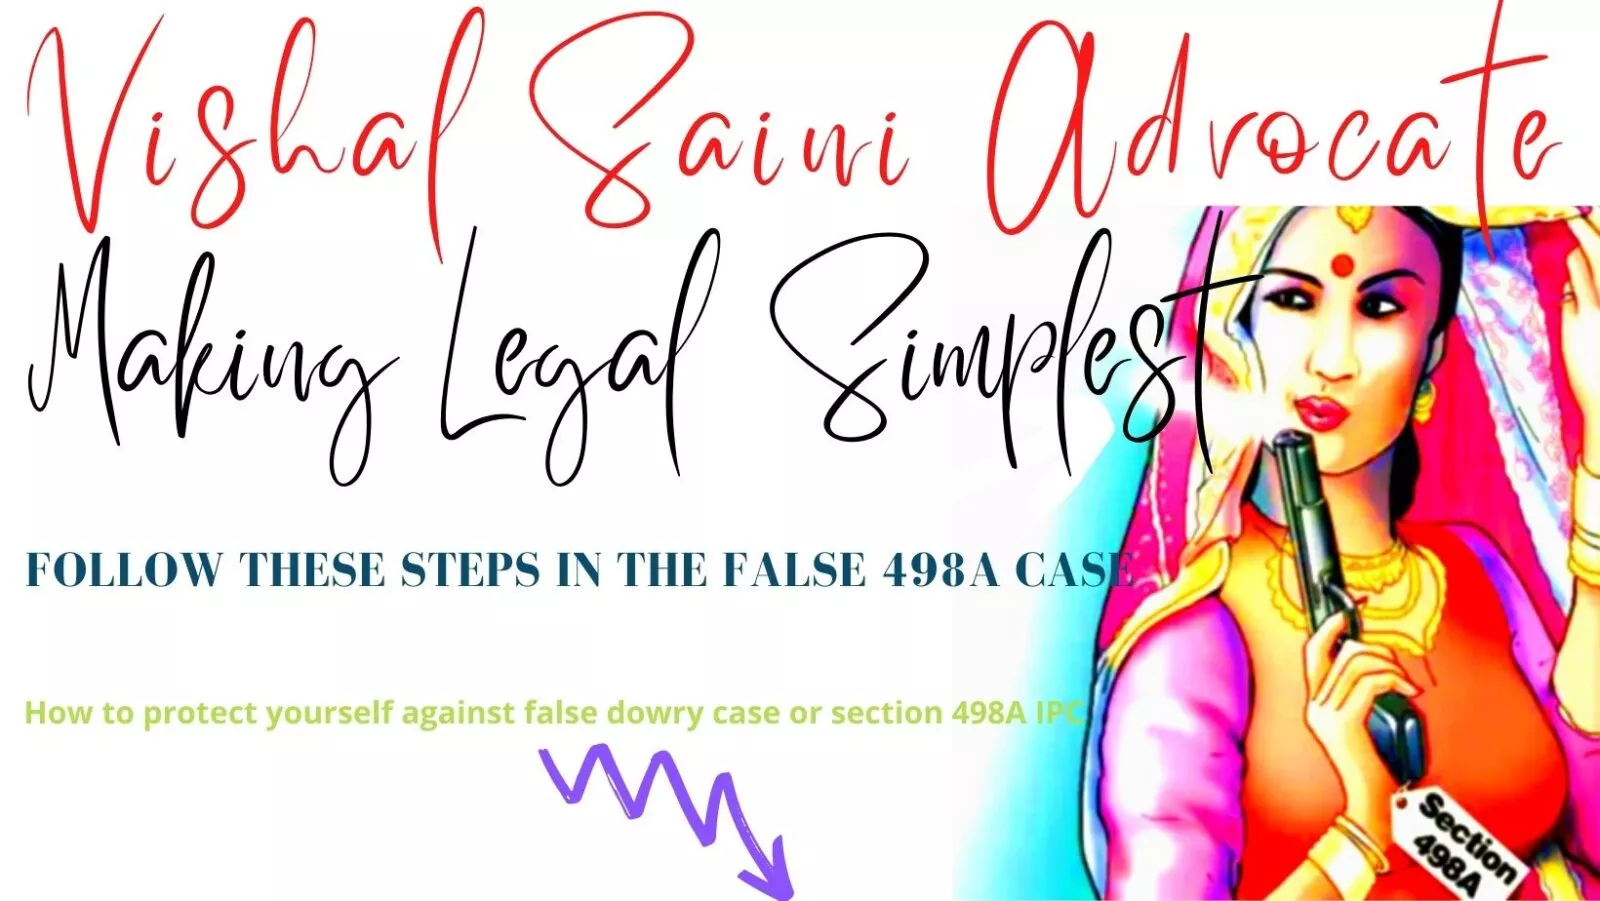 How to protect yourself against false dowry case or section 498A IPC